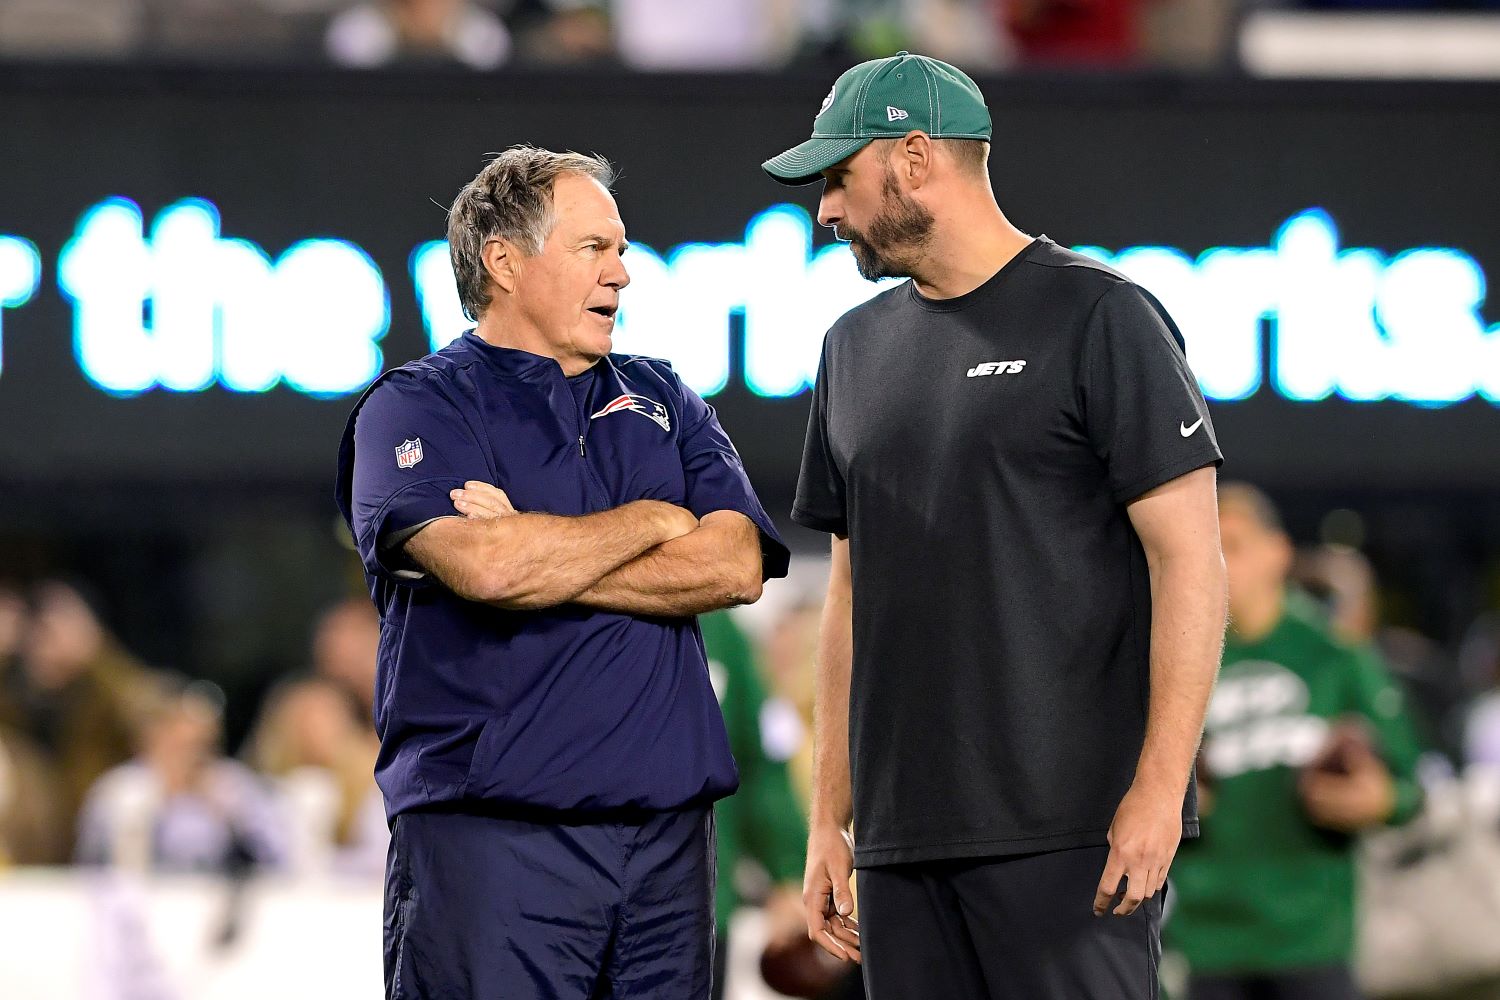 Patriots head coach Bill Belichick just admitted the brutal truth about leaving the New York Jets.